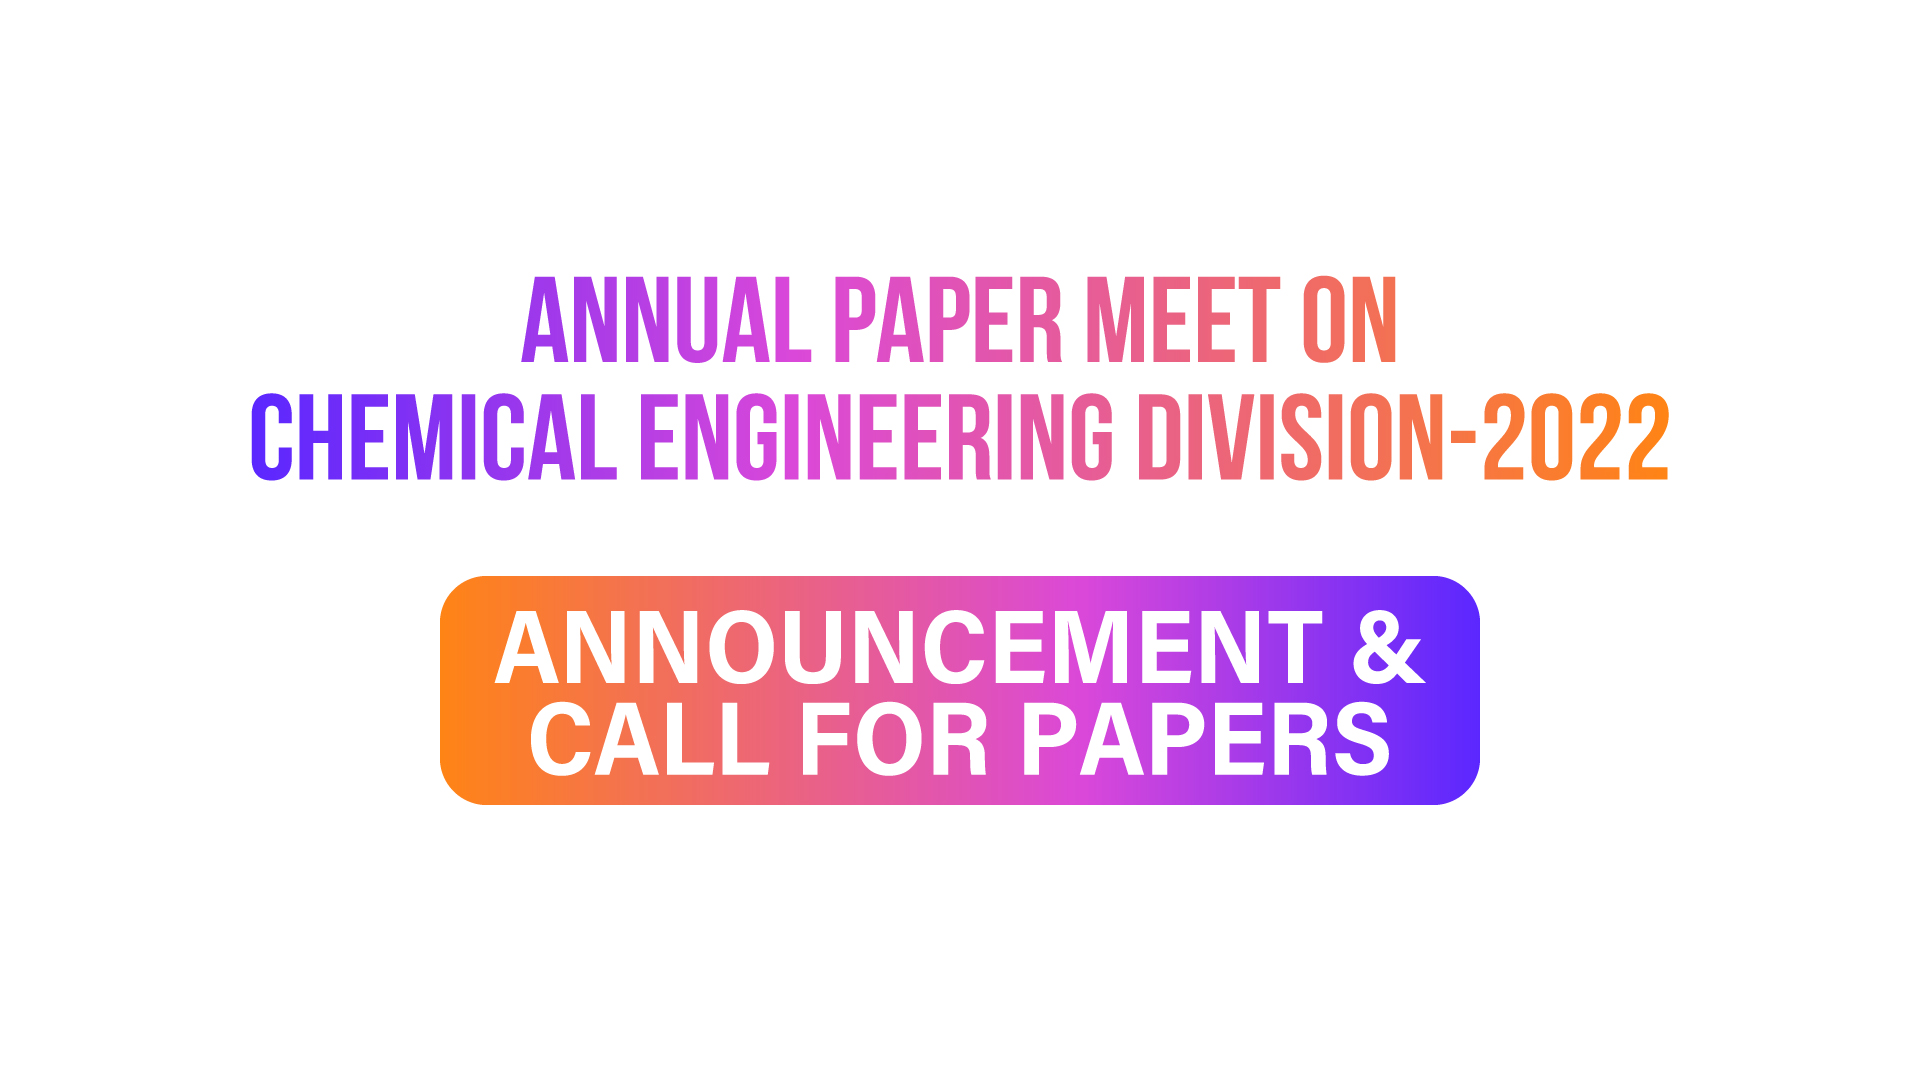 ANNOUNCEMENT & CALL FOR PAPERS || Annual Paper Meet on Chemical Engineering Division-2022